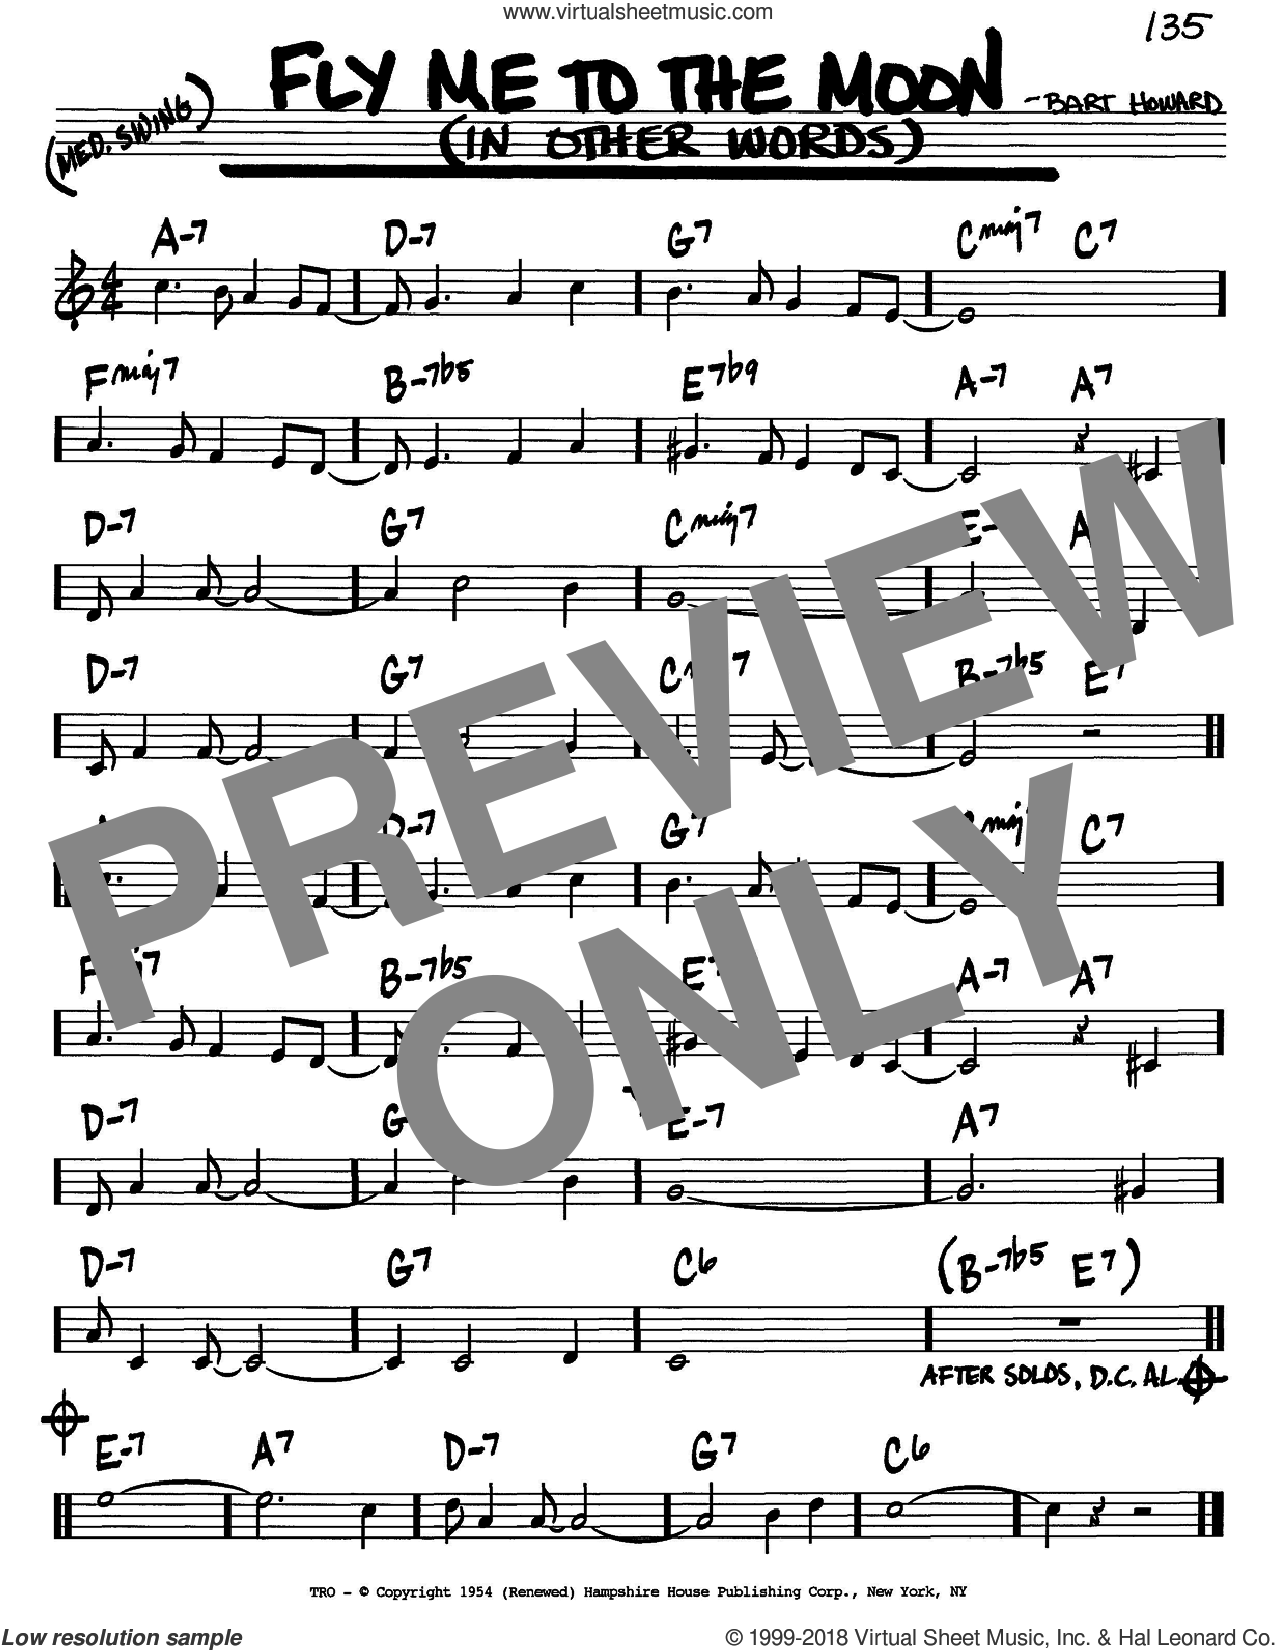 Fly Me To The Moon Sheet Music Pdf | amulette